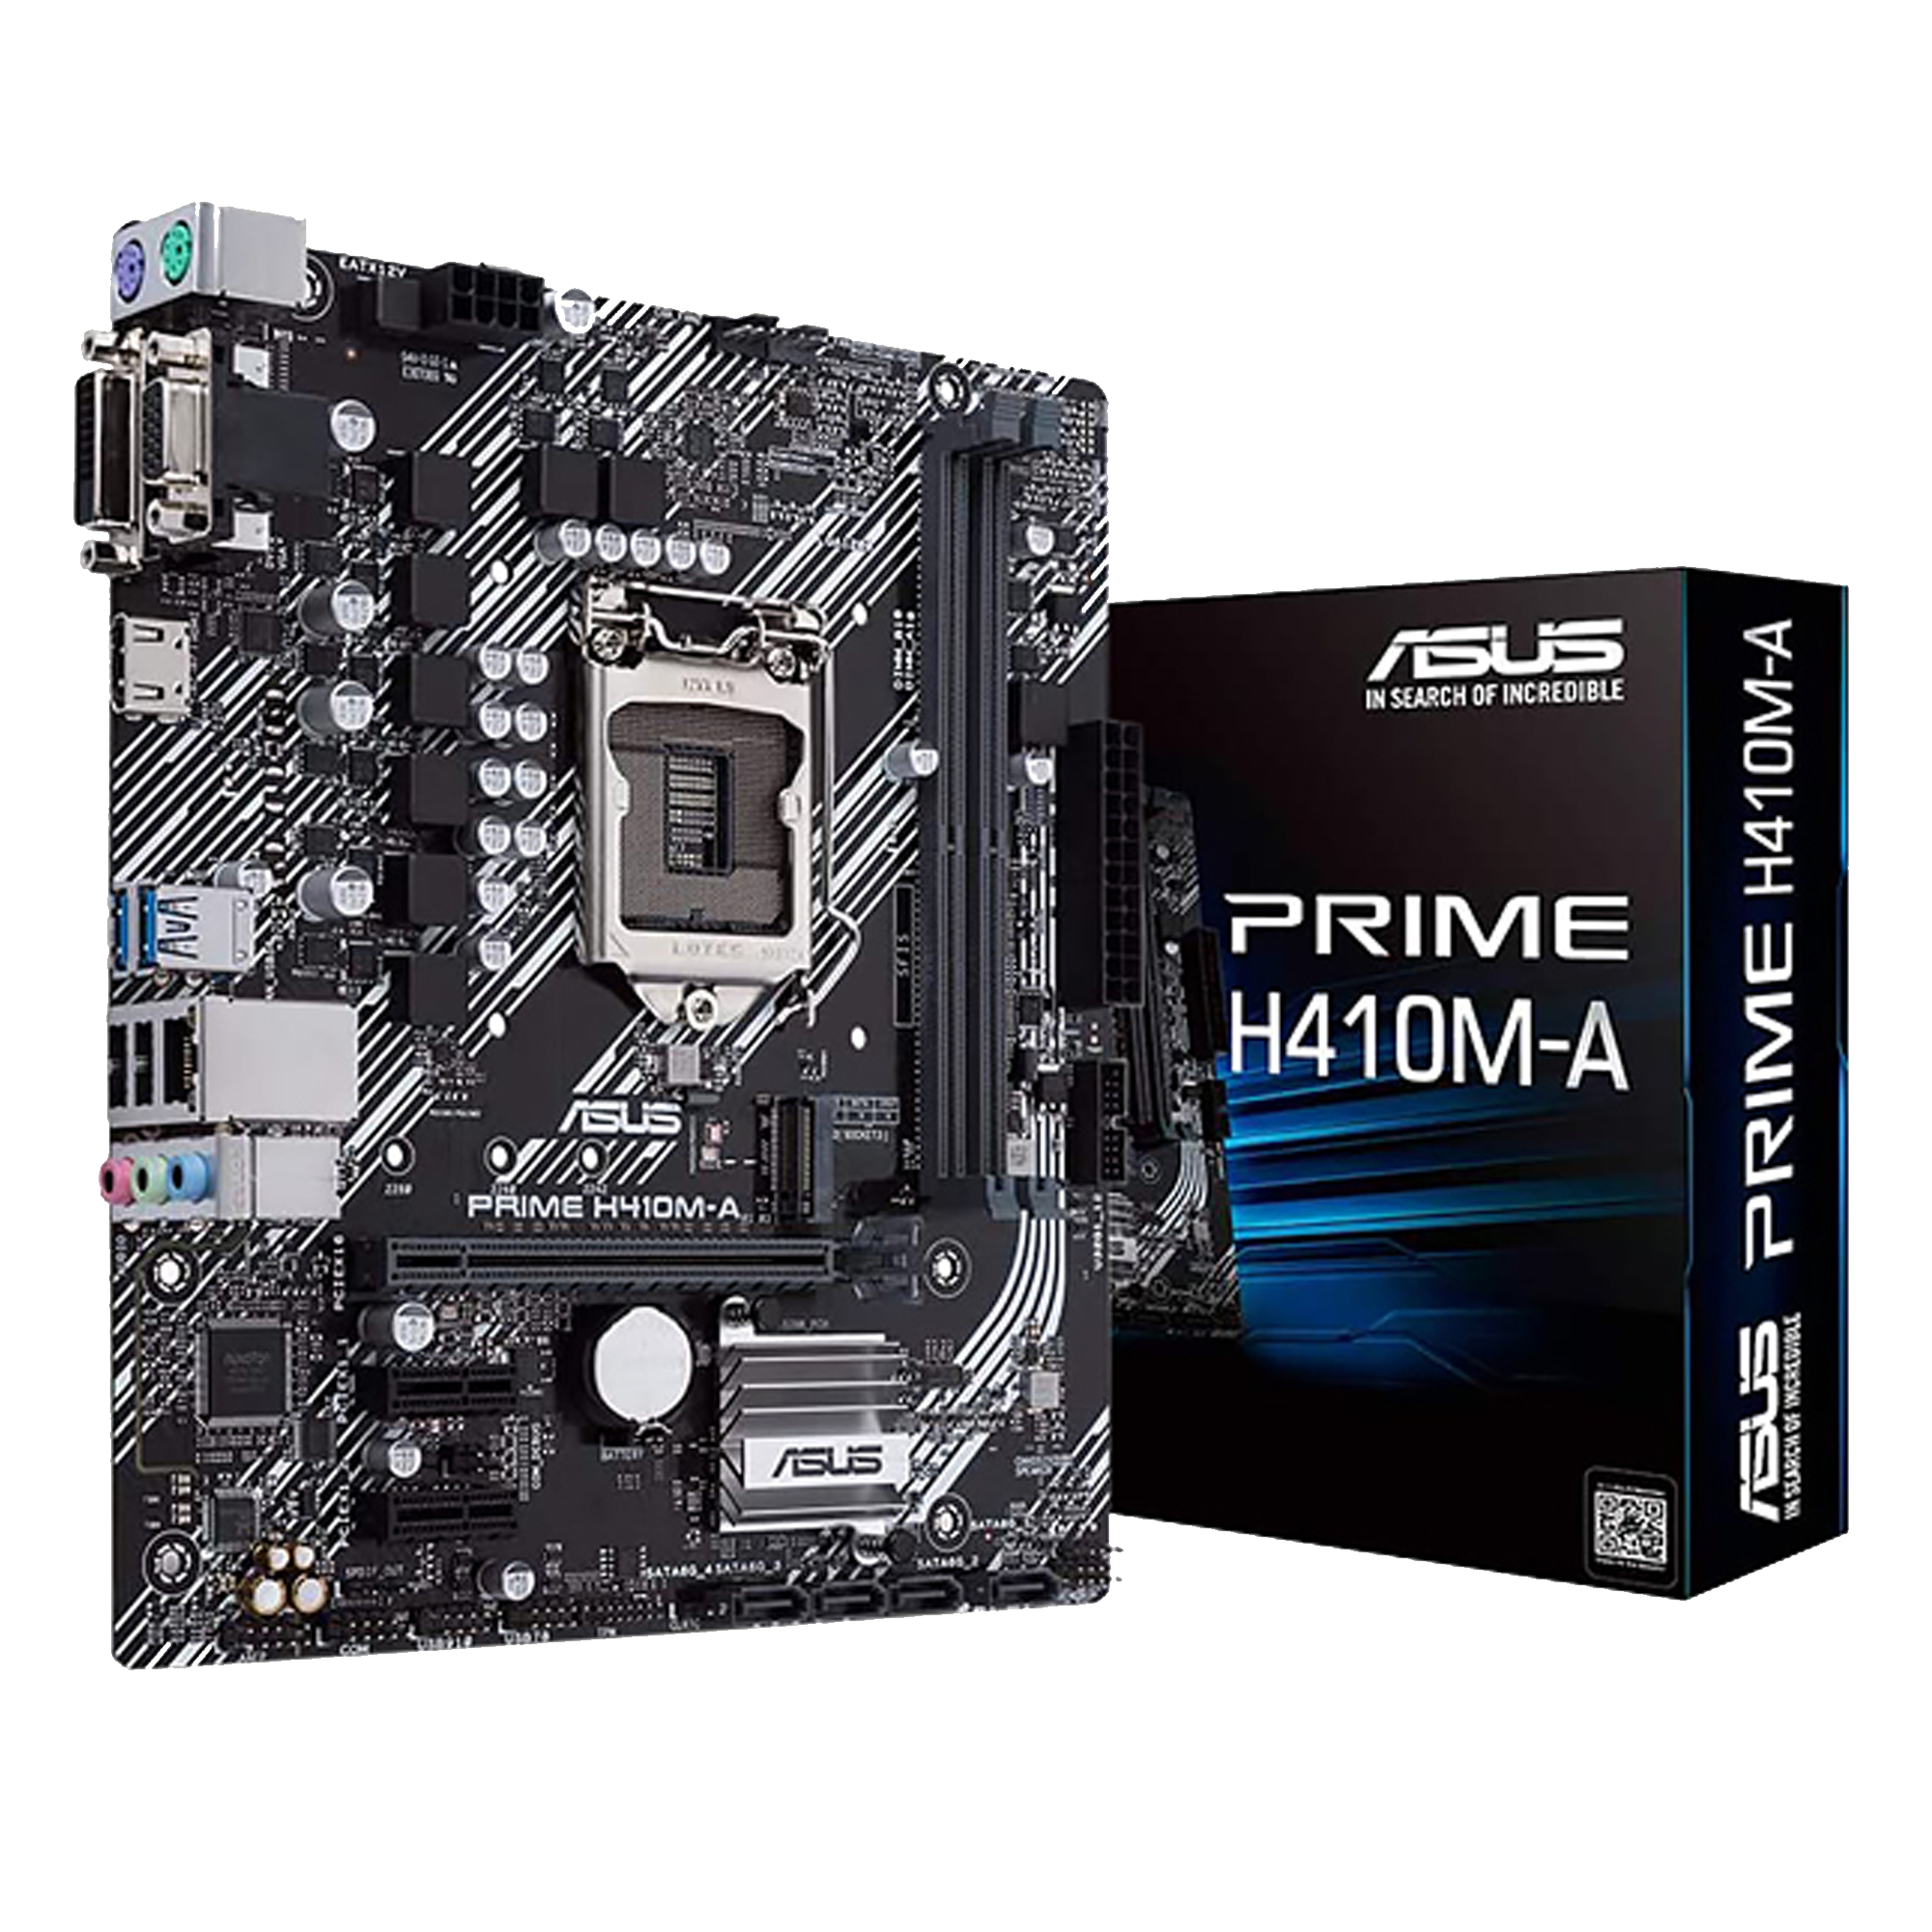 ASUS PRIME H410M-A Motherboards